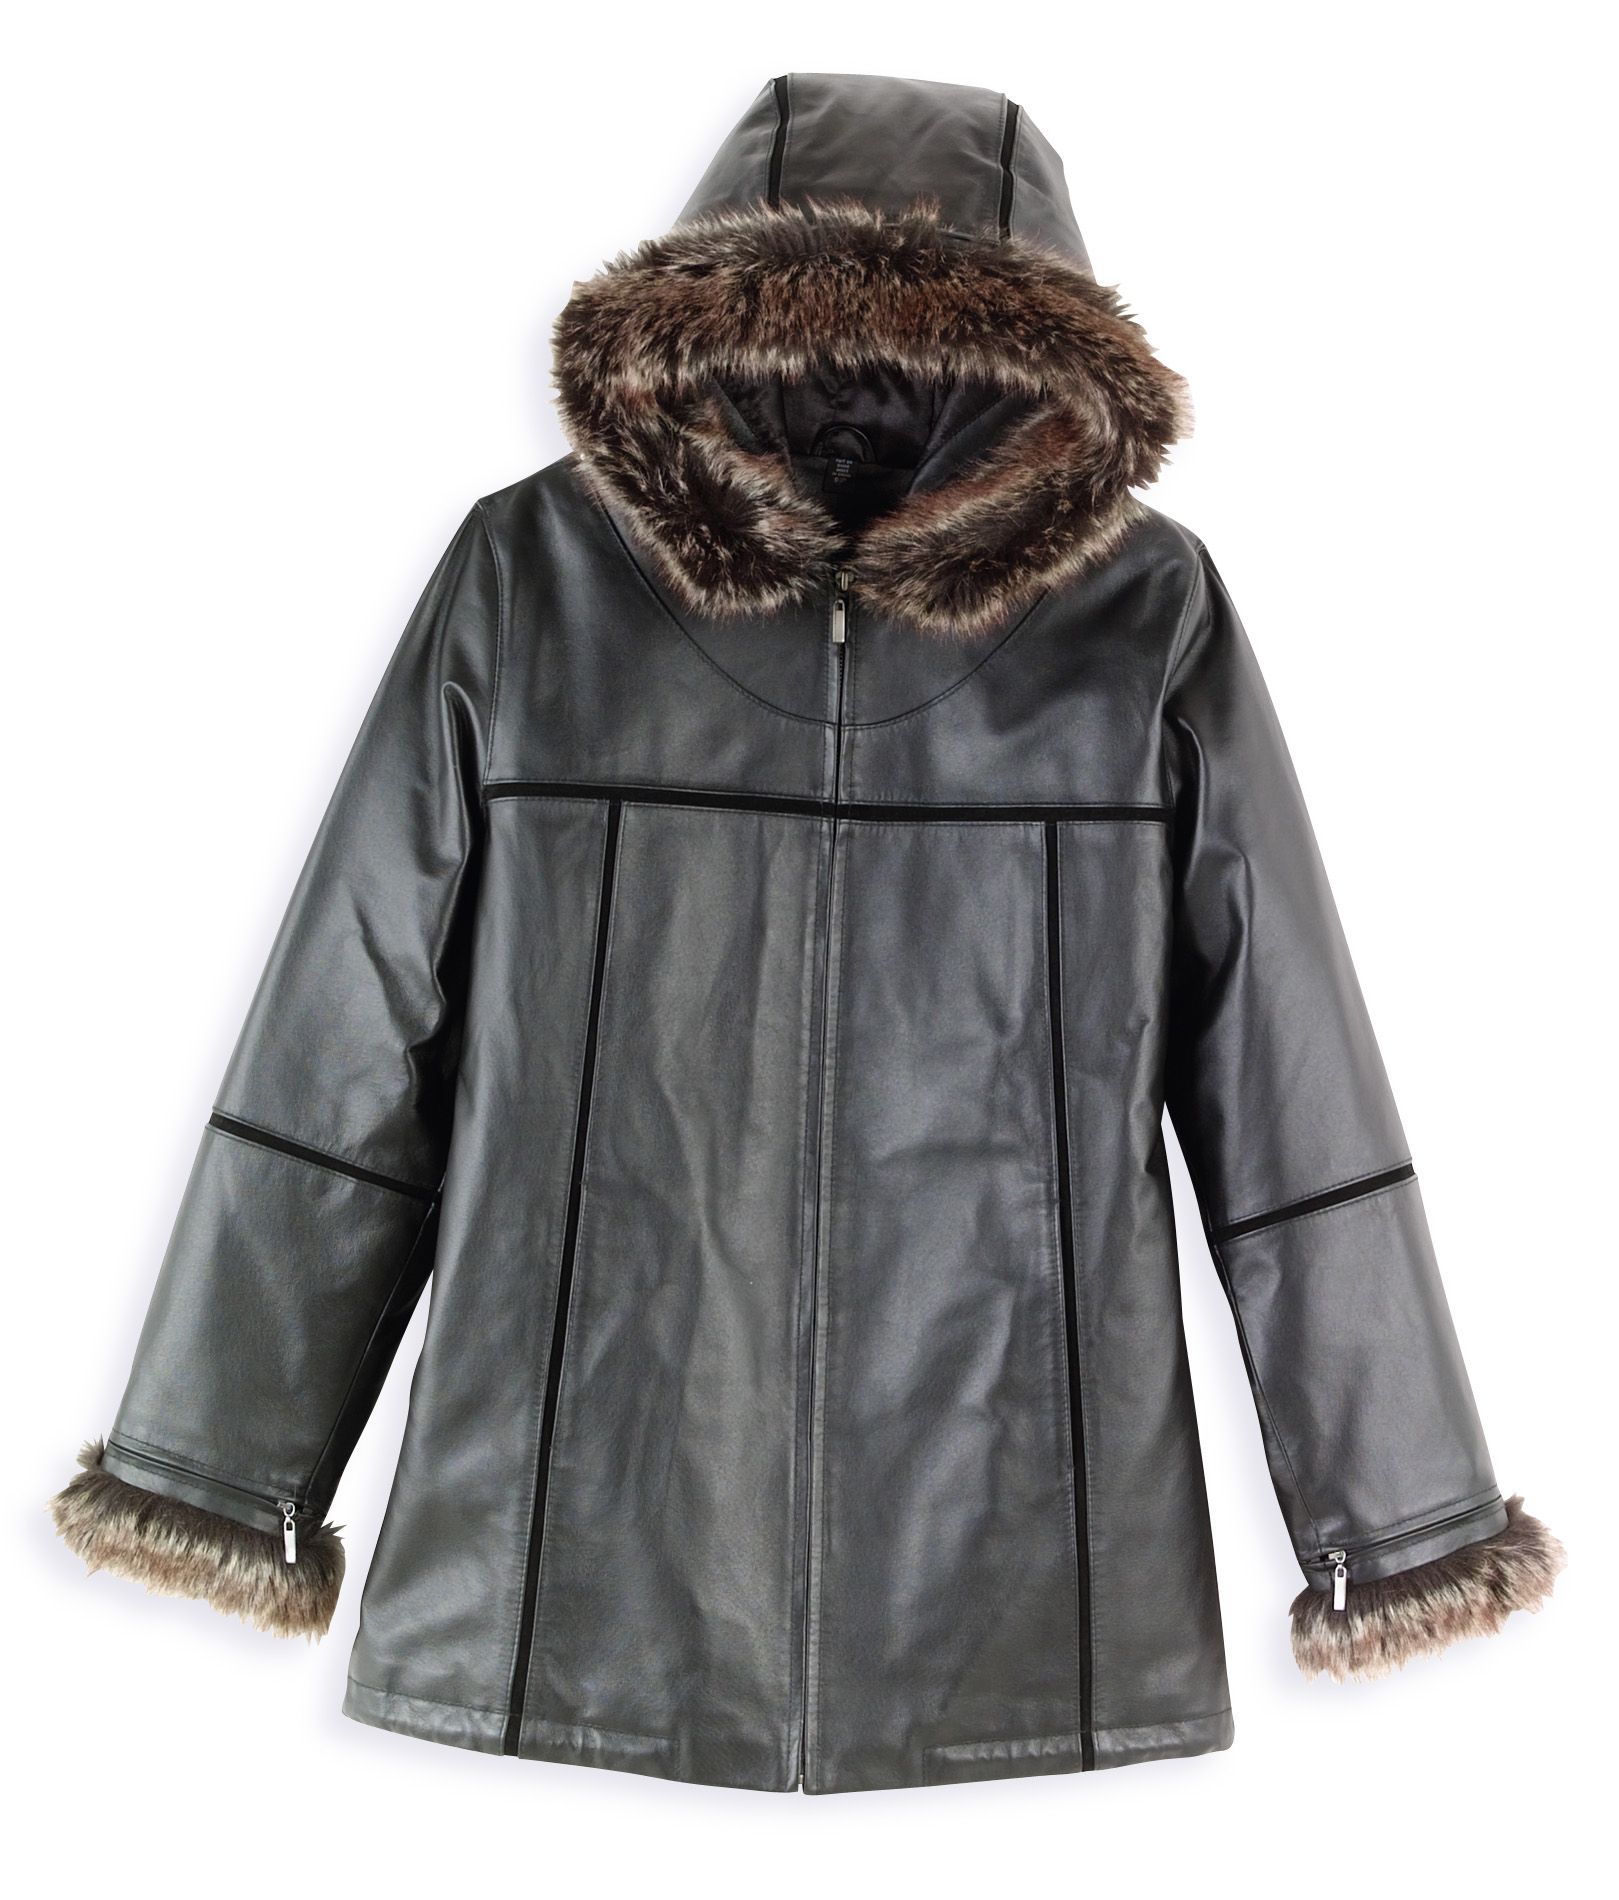 EMC Outerwear Ladies Leather Jacket with Faux Fur Trim on Hood and Cuffs